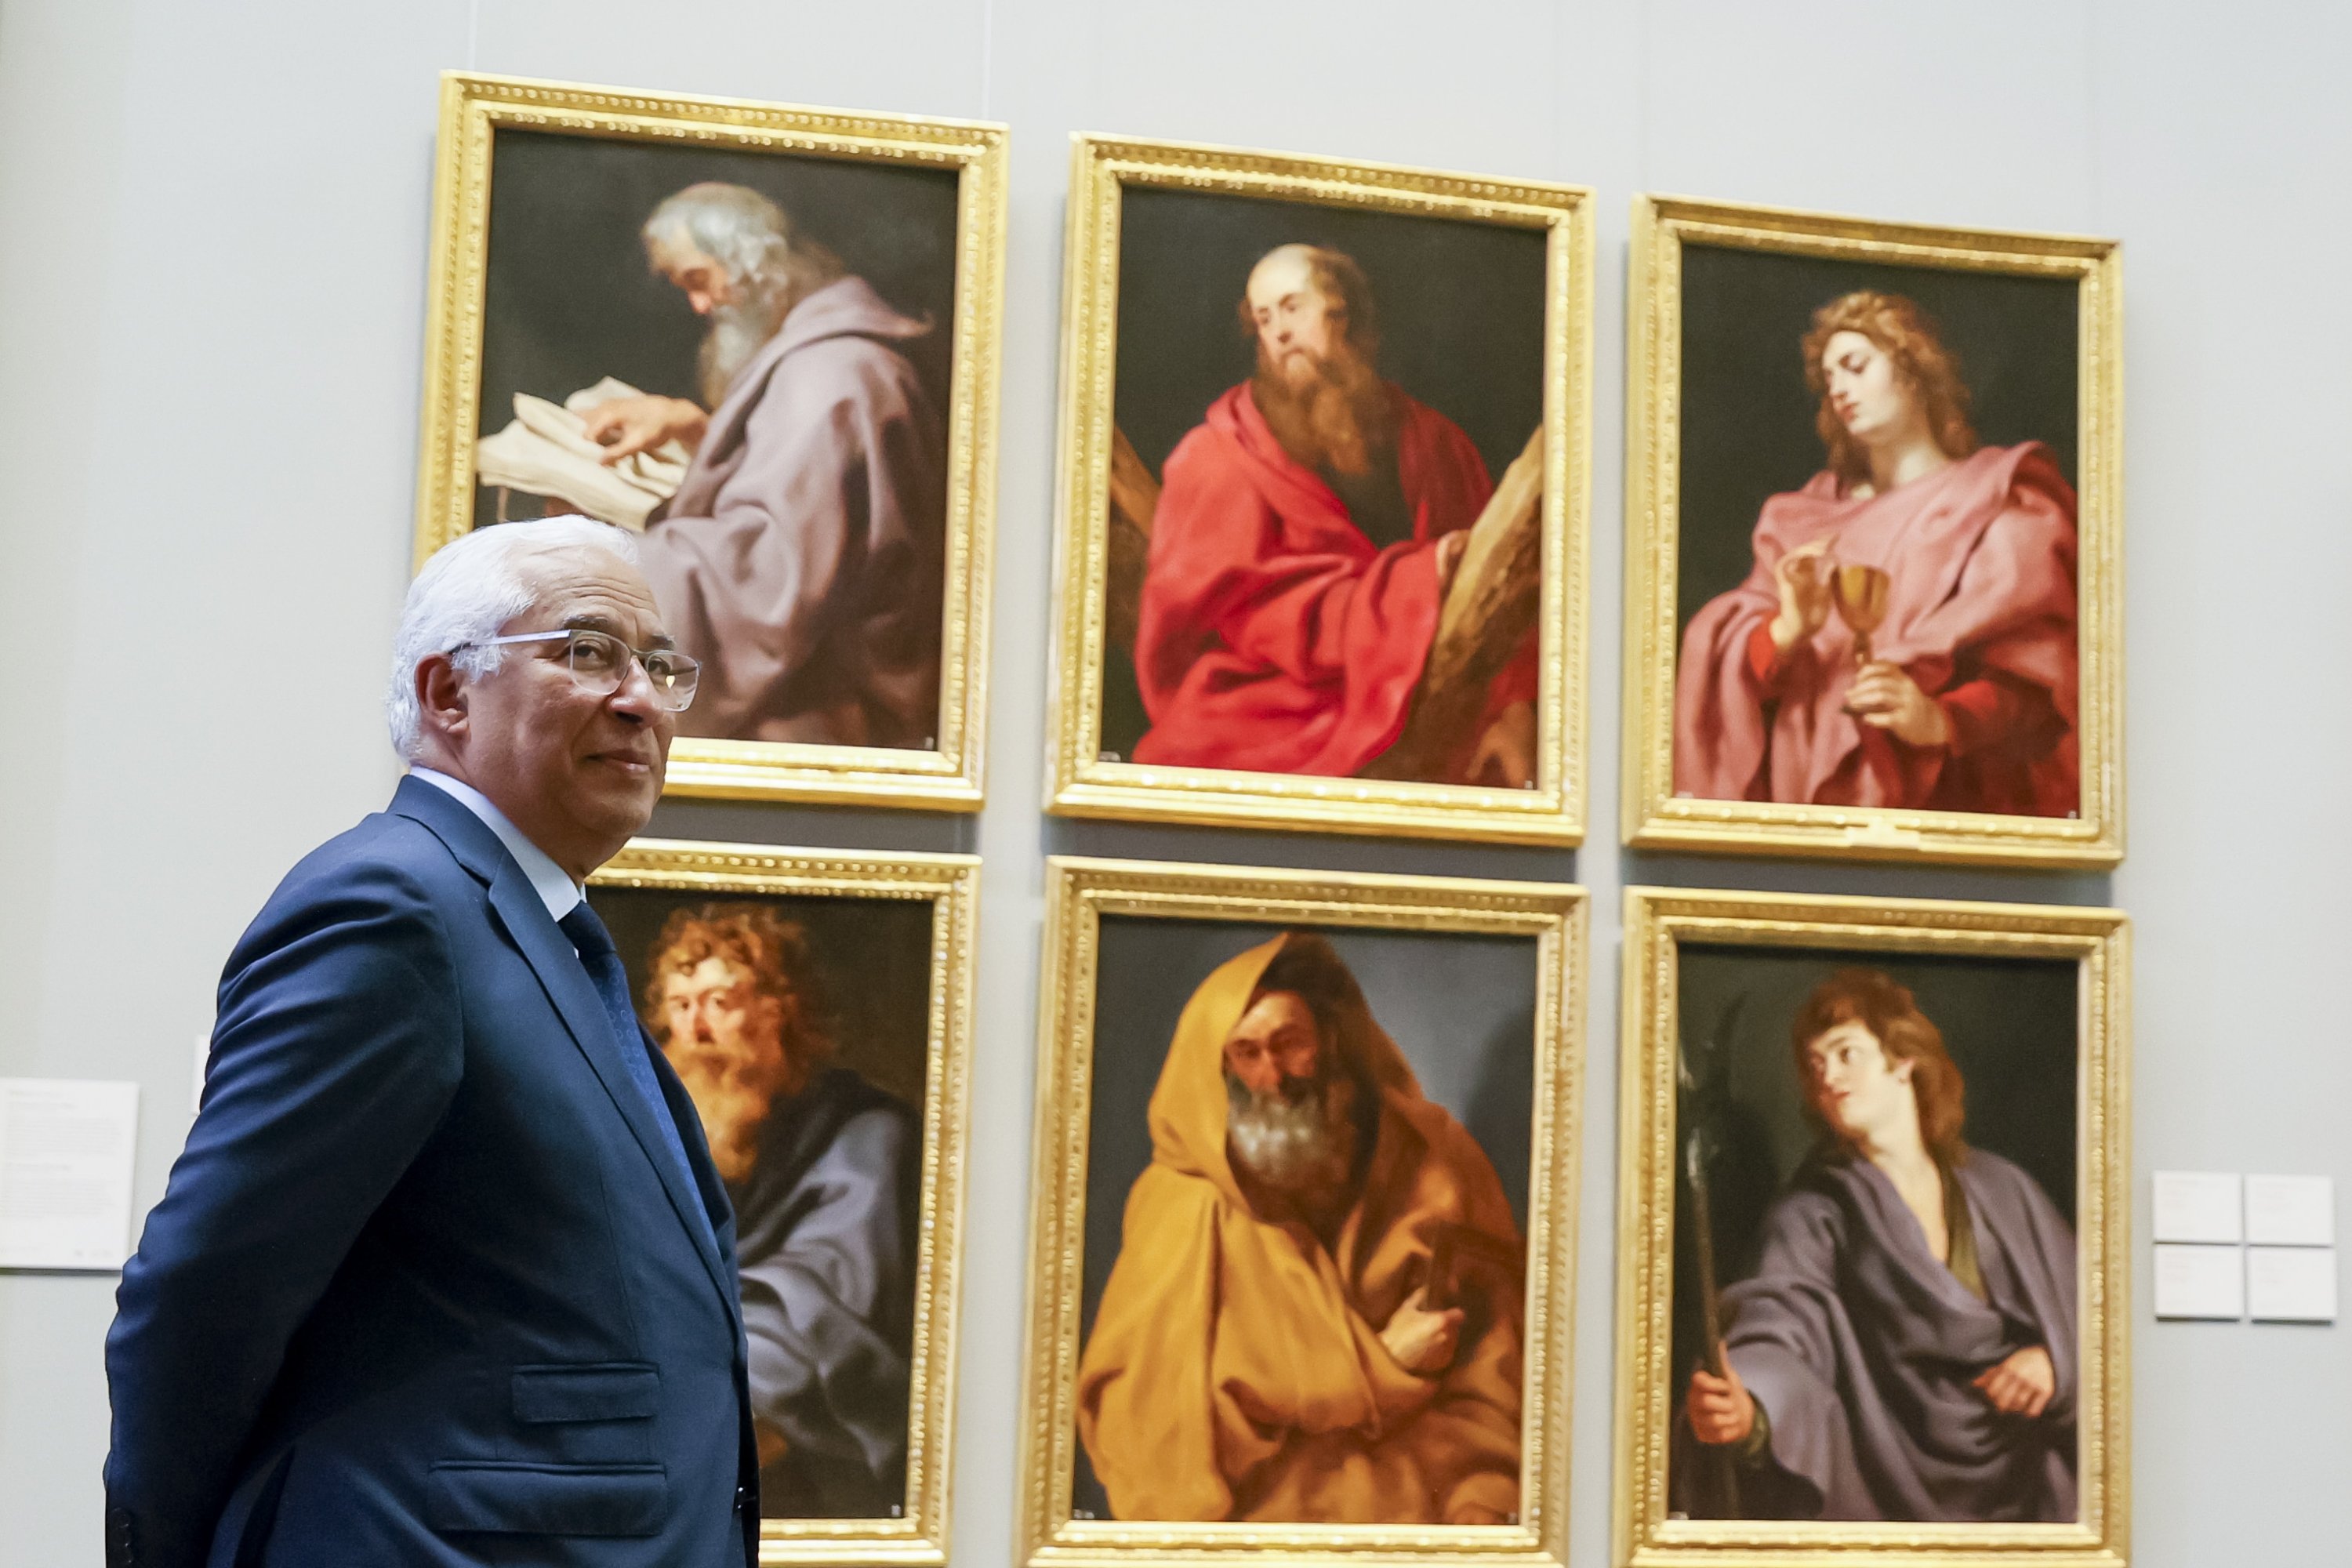 Portuguese Prime Minister Antonio Costa arrives at the Prado Museum before a dinner on the first day of the NATO Summit, Madrid, Spain, June 29, 2022. (EPA Photo)